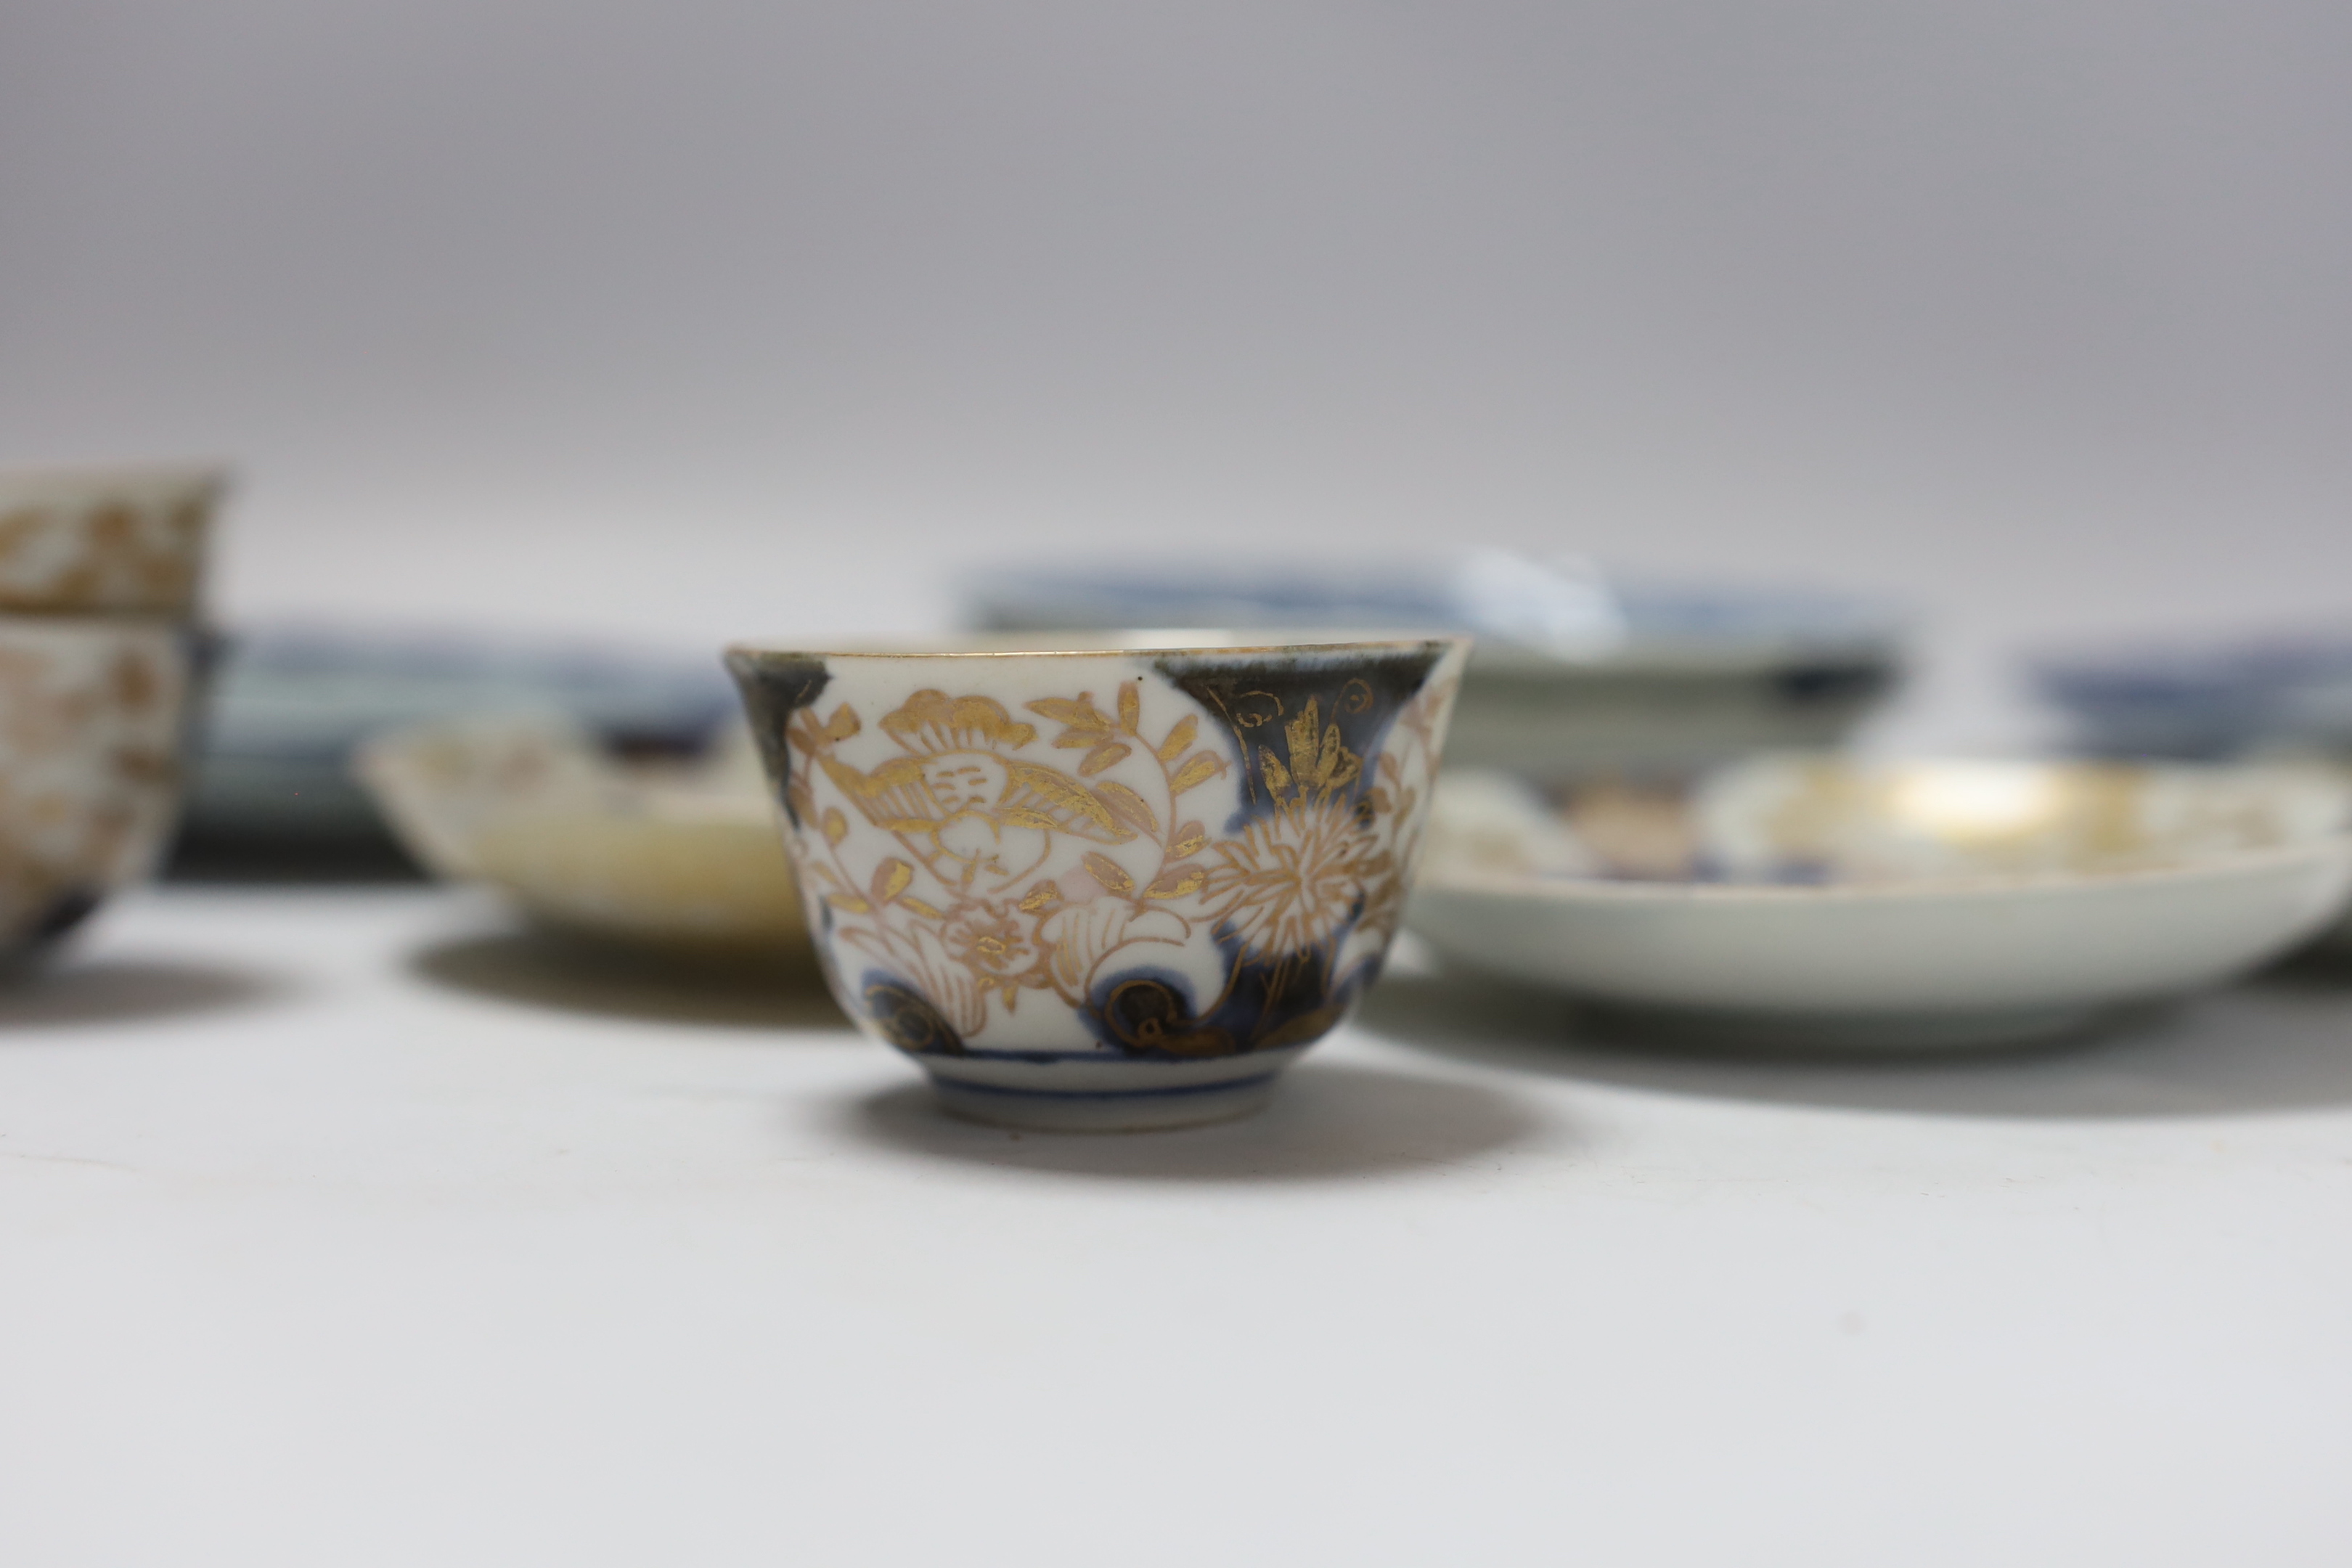 Four 18th century Japanese teabowls with three matching saucers, two 19th century Chinese cafe au lait glazed teabowls and four Chinese blue and white small dishes